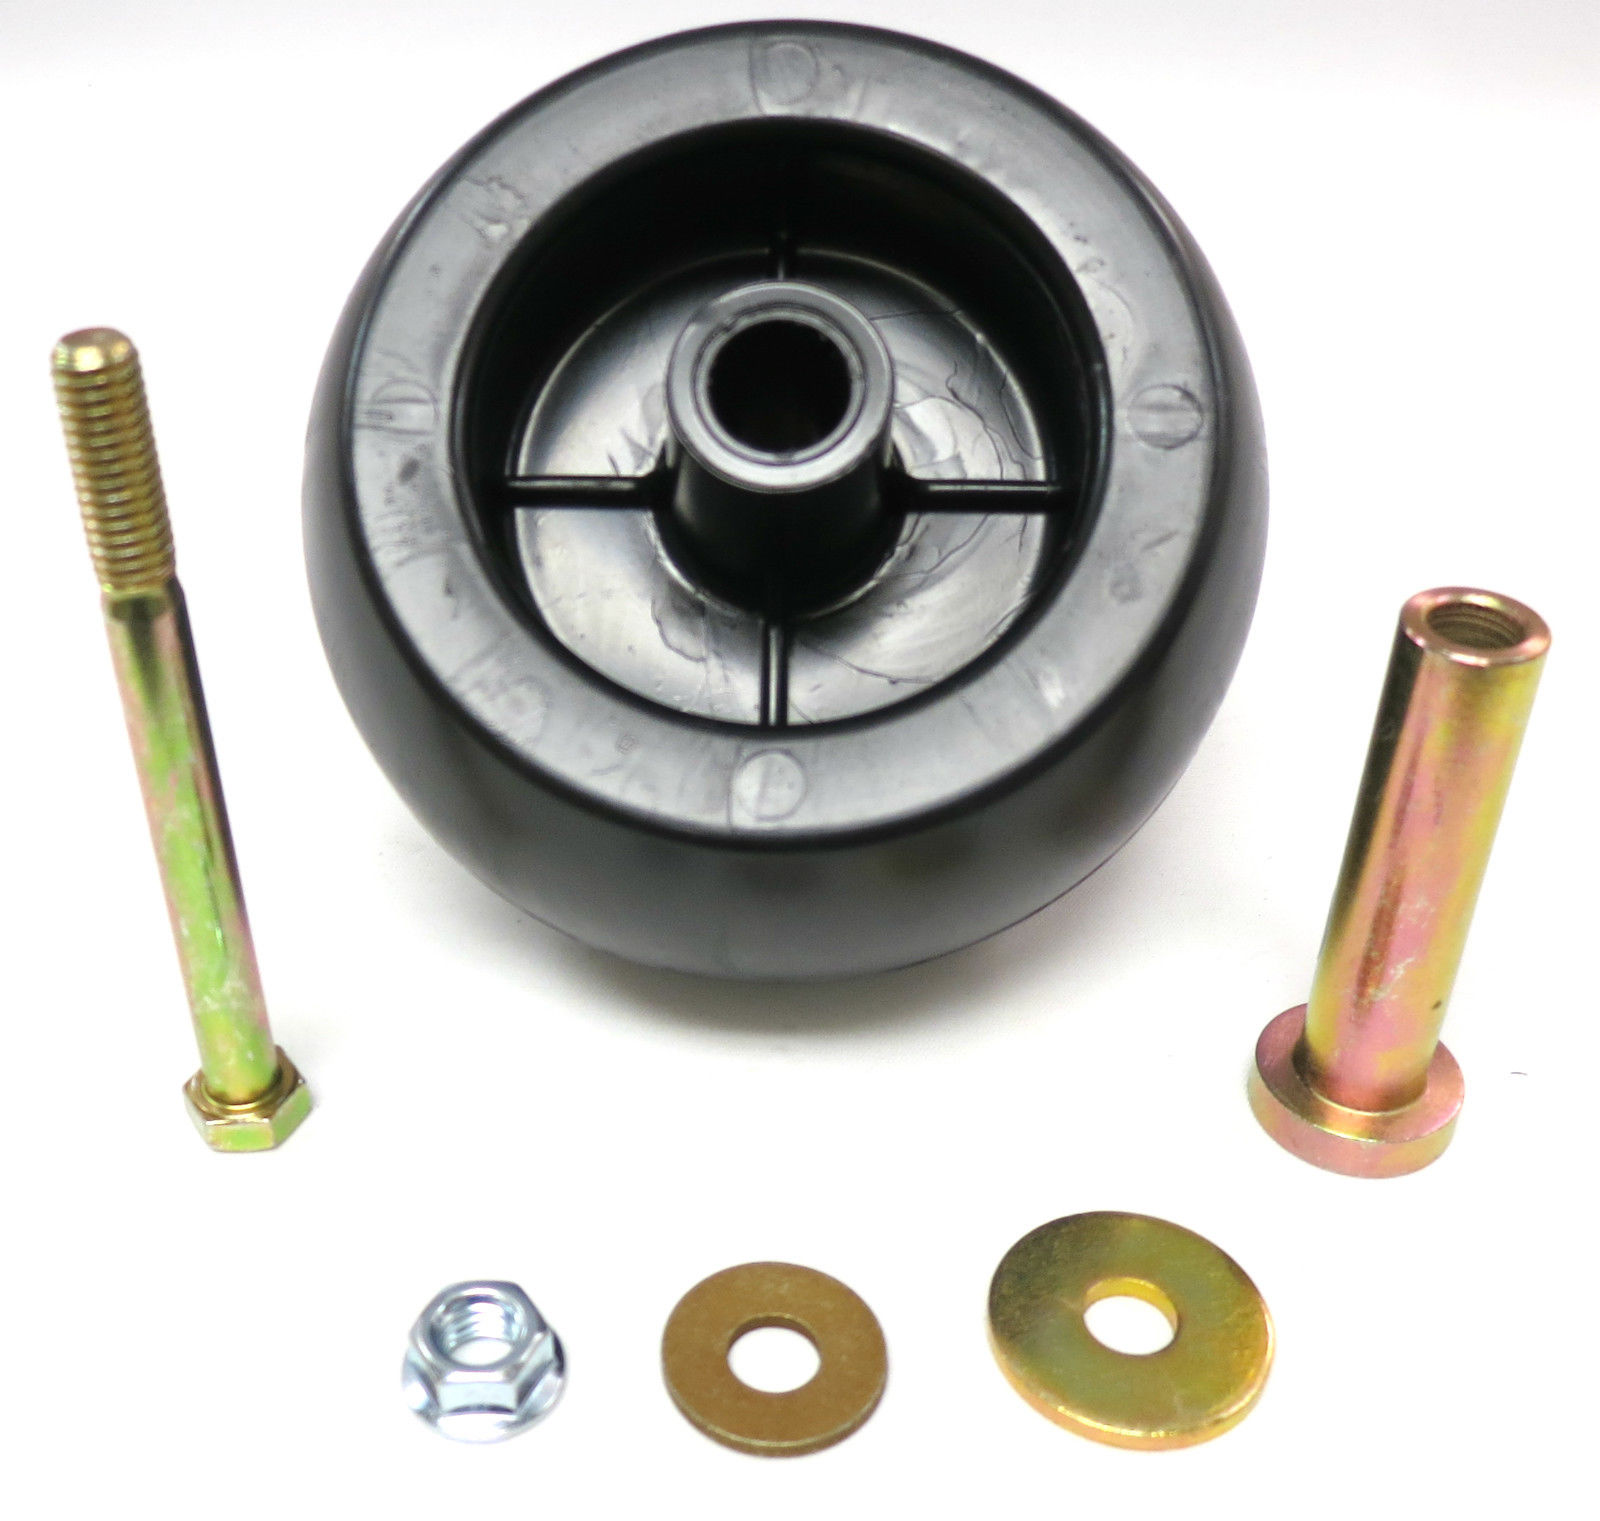 The ROP Shop | (2) Deck Wheel Roller Kits For Stens 210-169 Rotary 10301 Mowers Tractors ZTRs - image 3 of 5